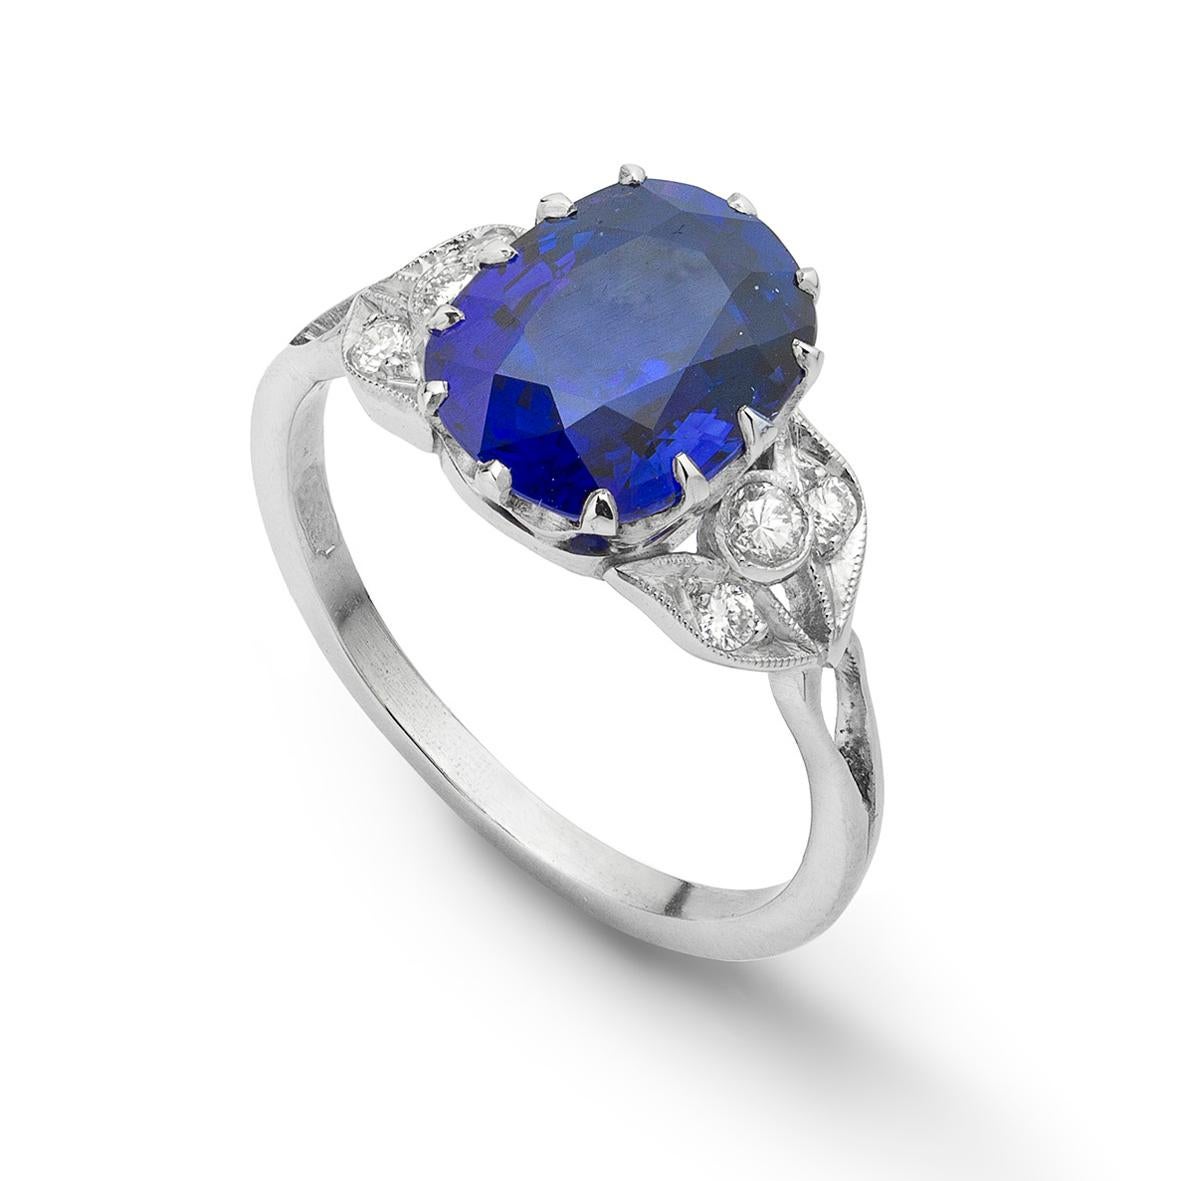 A cushion-shape sapphire and diamond ring, the sapphire weighing 3.66 carats, claw set to a platinum mount with diamond-set leaf shoulders, hallmarked platinum, London 2012, made by Bentley and Skinner,  the head measuring approximately 1x0.8cm,